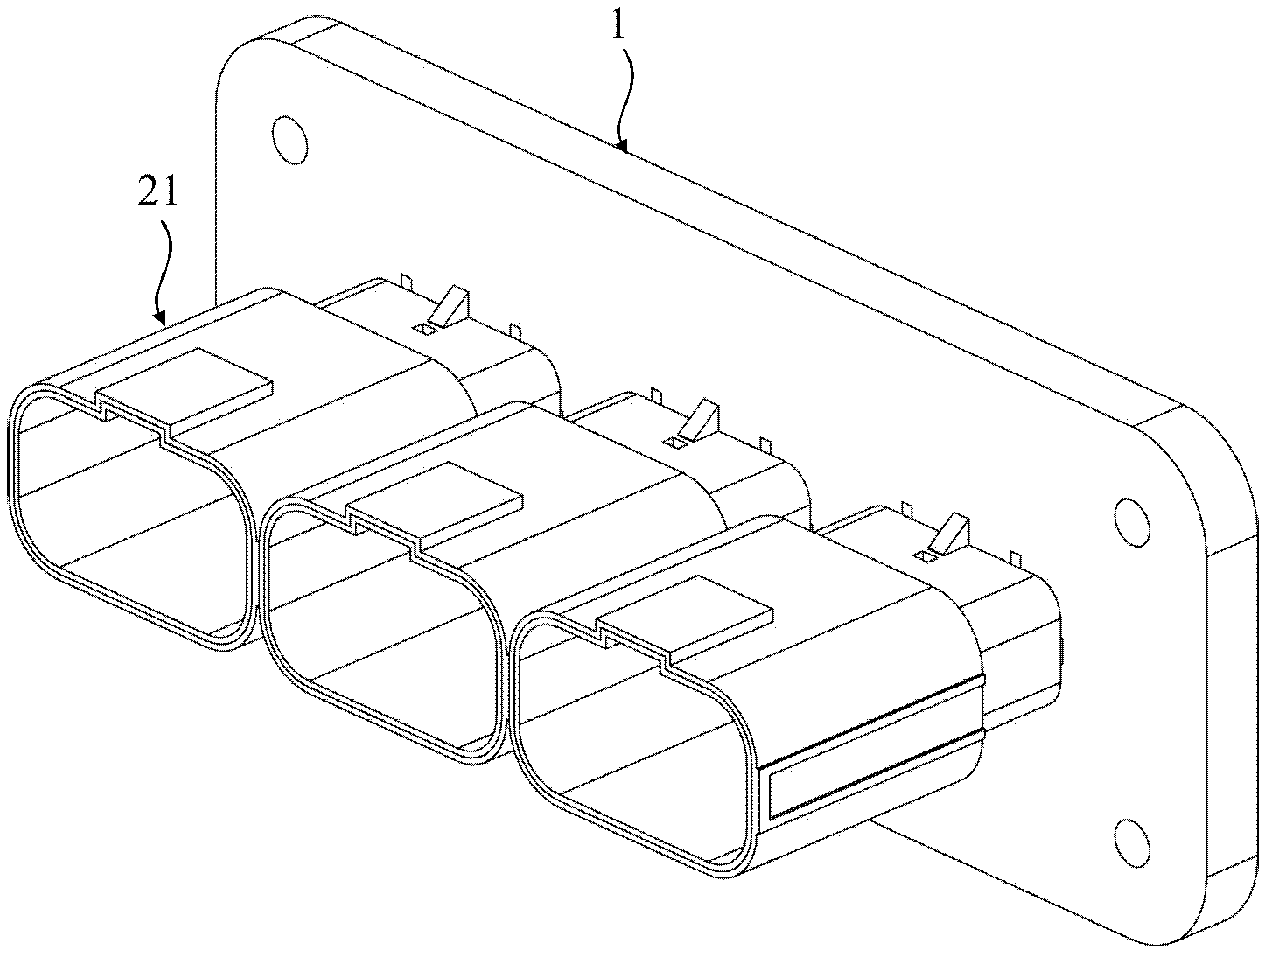 Shielded connector assembly